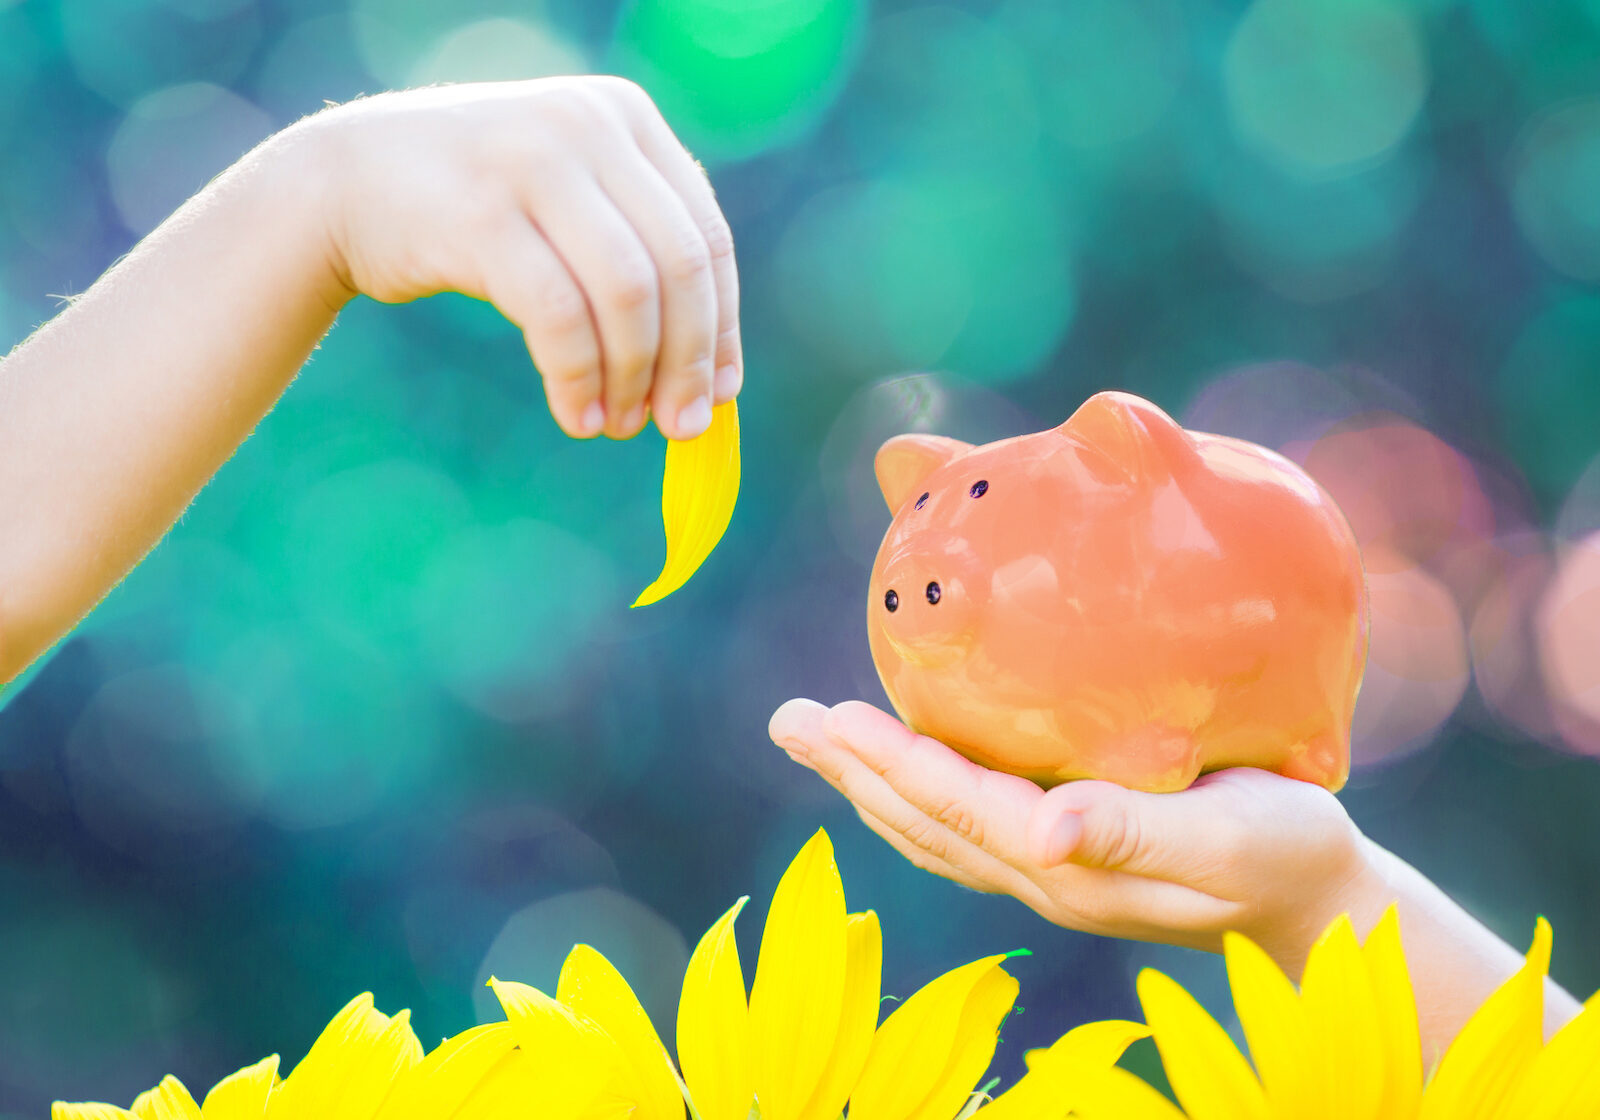 Piggybank and leaf in hands against green spring background. Shallow depth of field